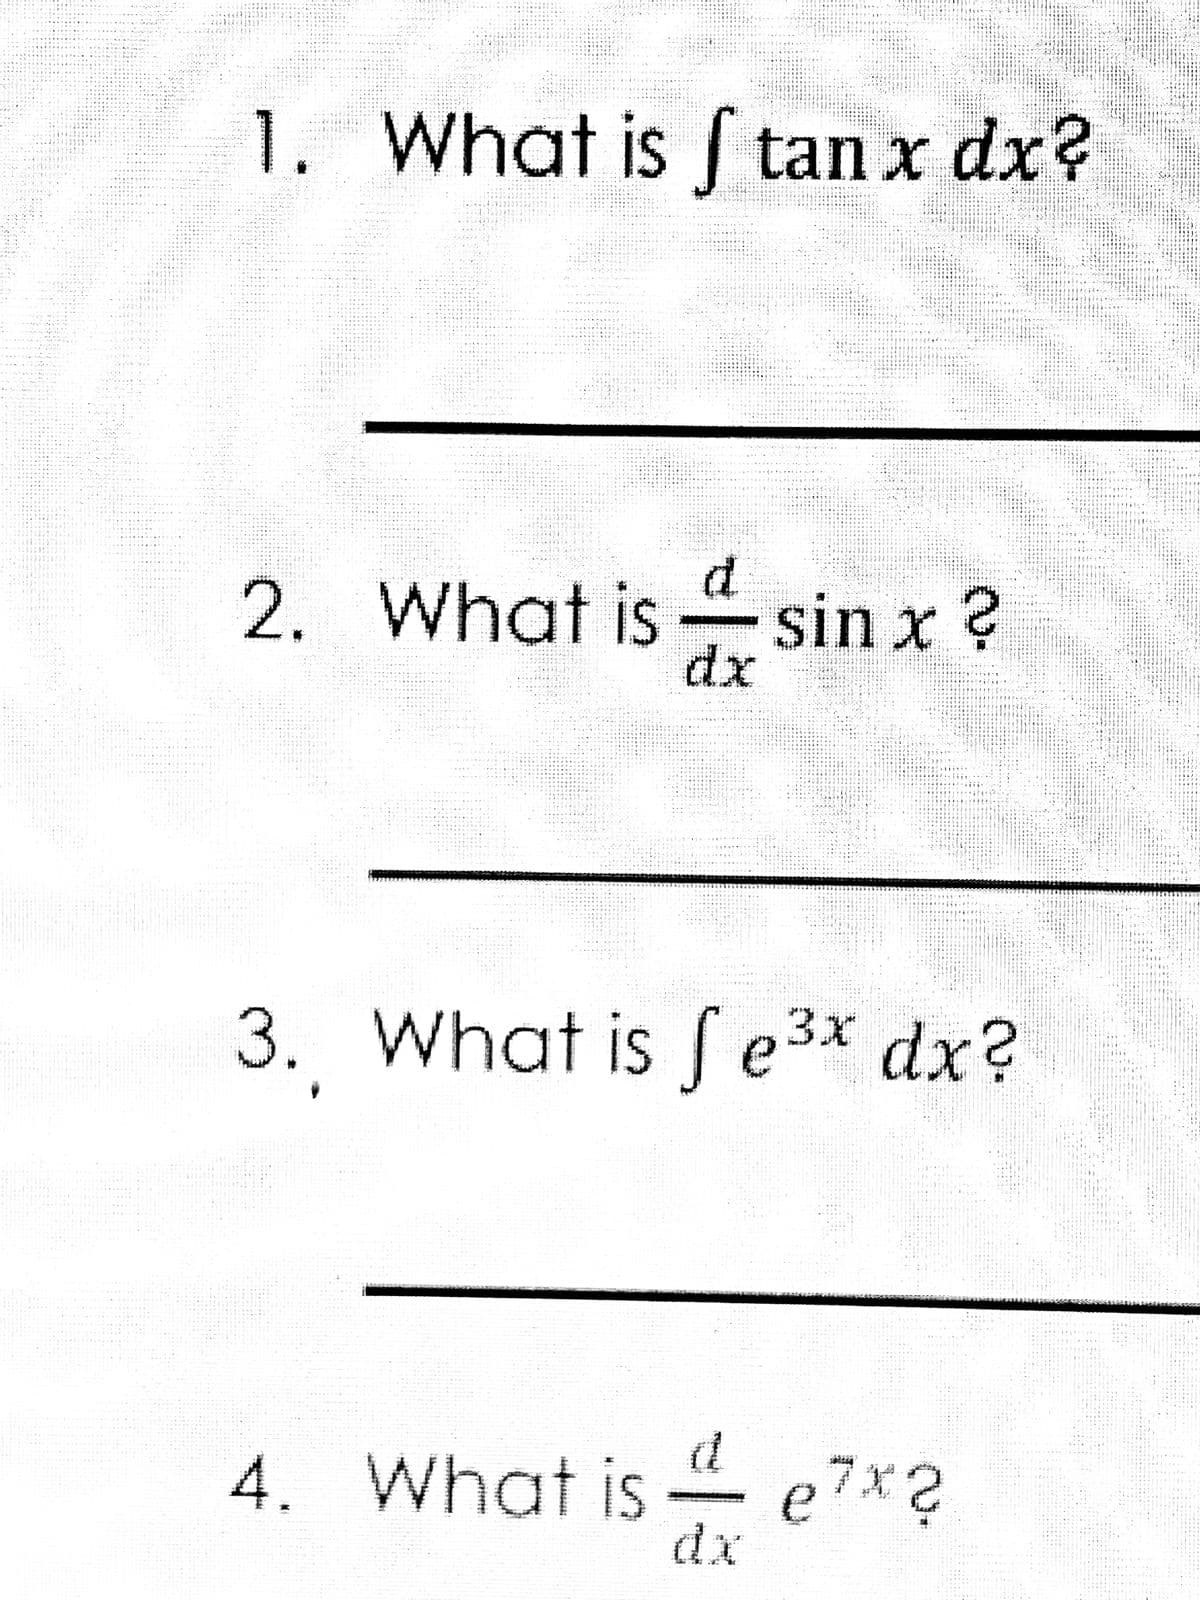 1. What is tan x dx?
2. What is sin x ?
dx
3. What is e3x dx?
d
4. What is e7x?
dx
